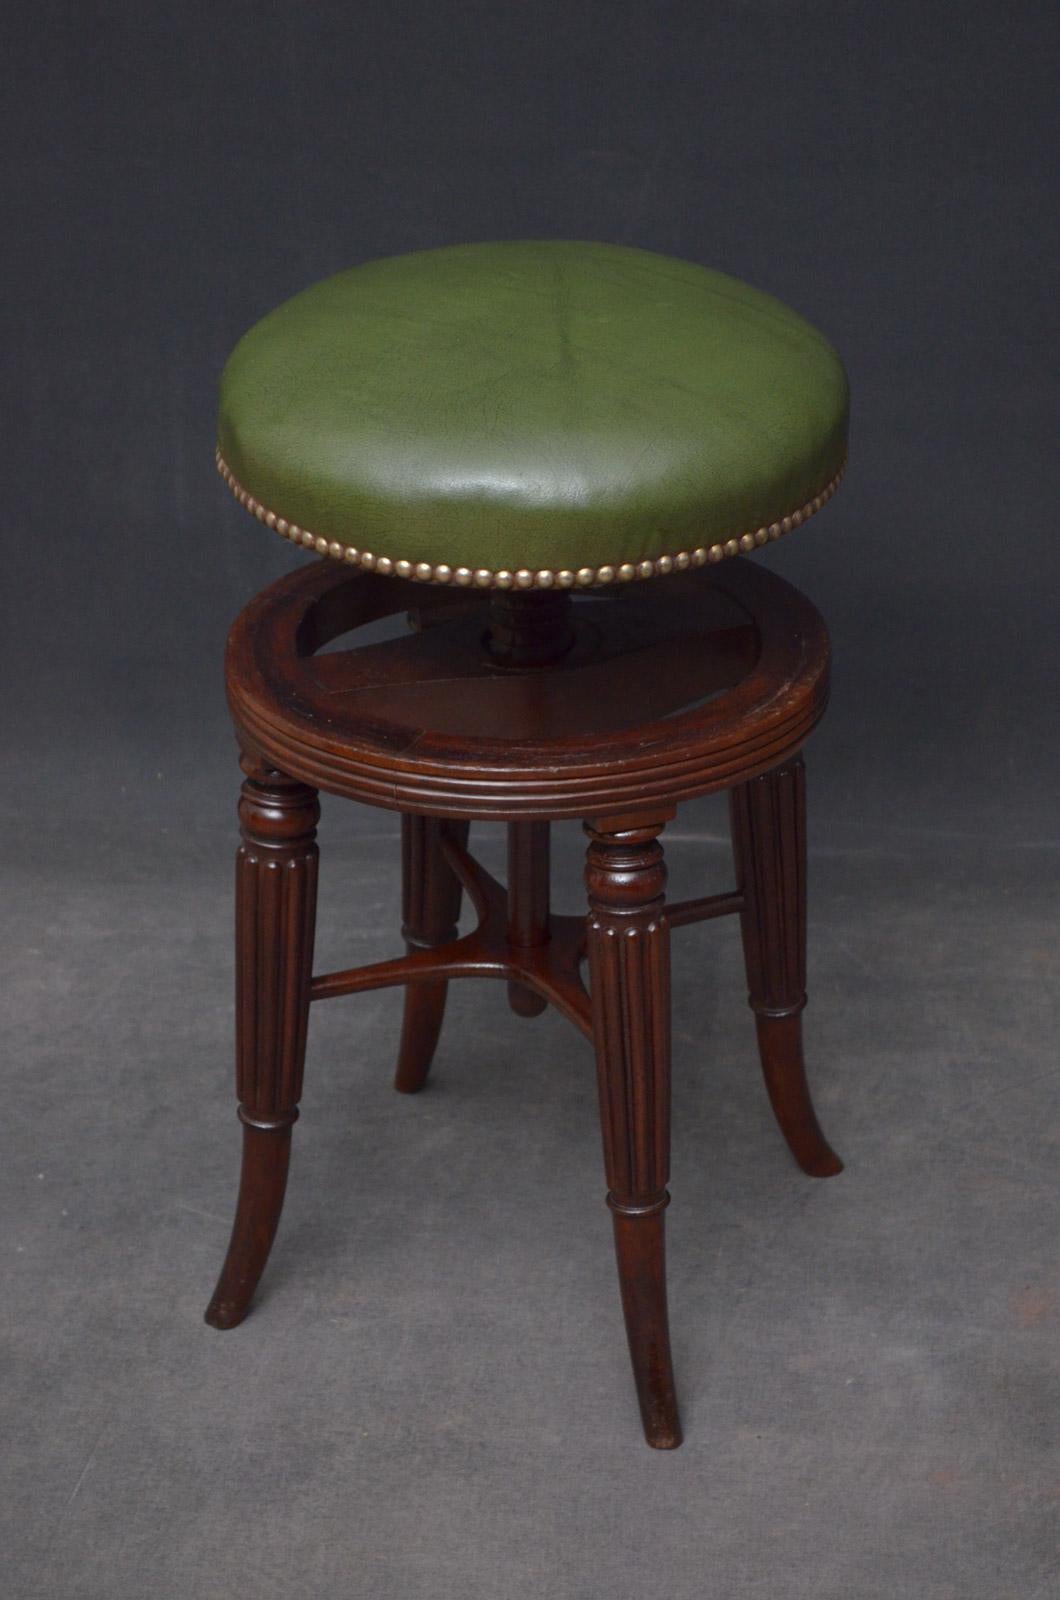 Sn4510 Regency mahogany revolving stool, having height adjustable seat, reeded rails and 4 outswept fluted legs.
This antique stool is in home ready condition, circa 1820
Measures: Height 19-23